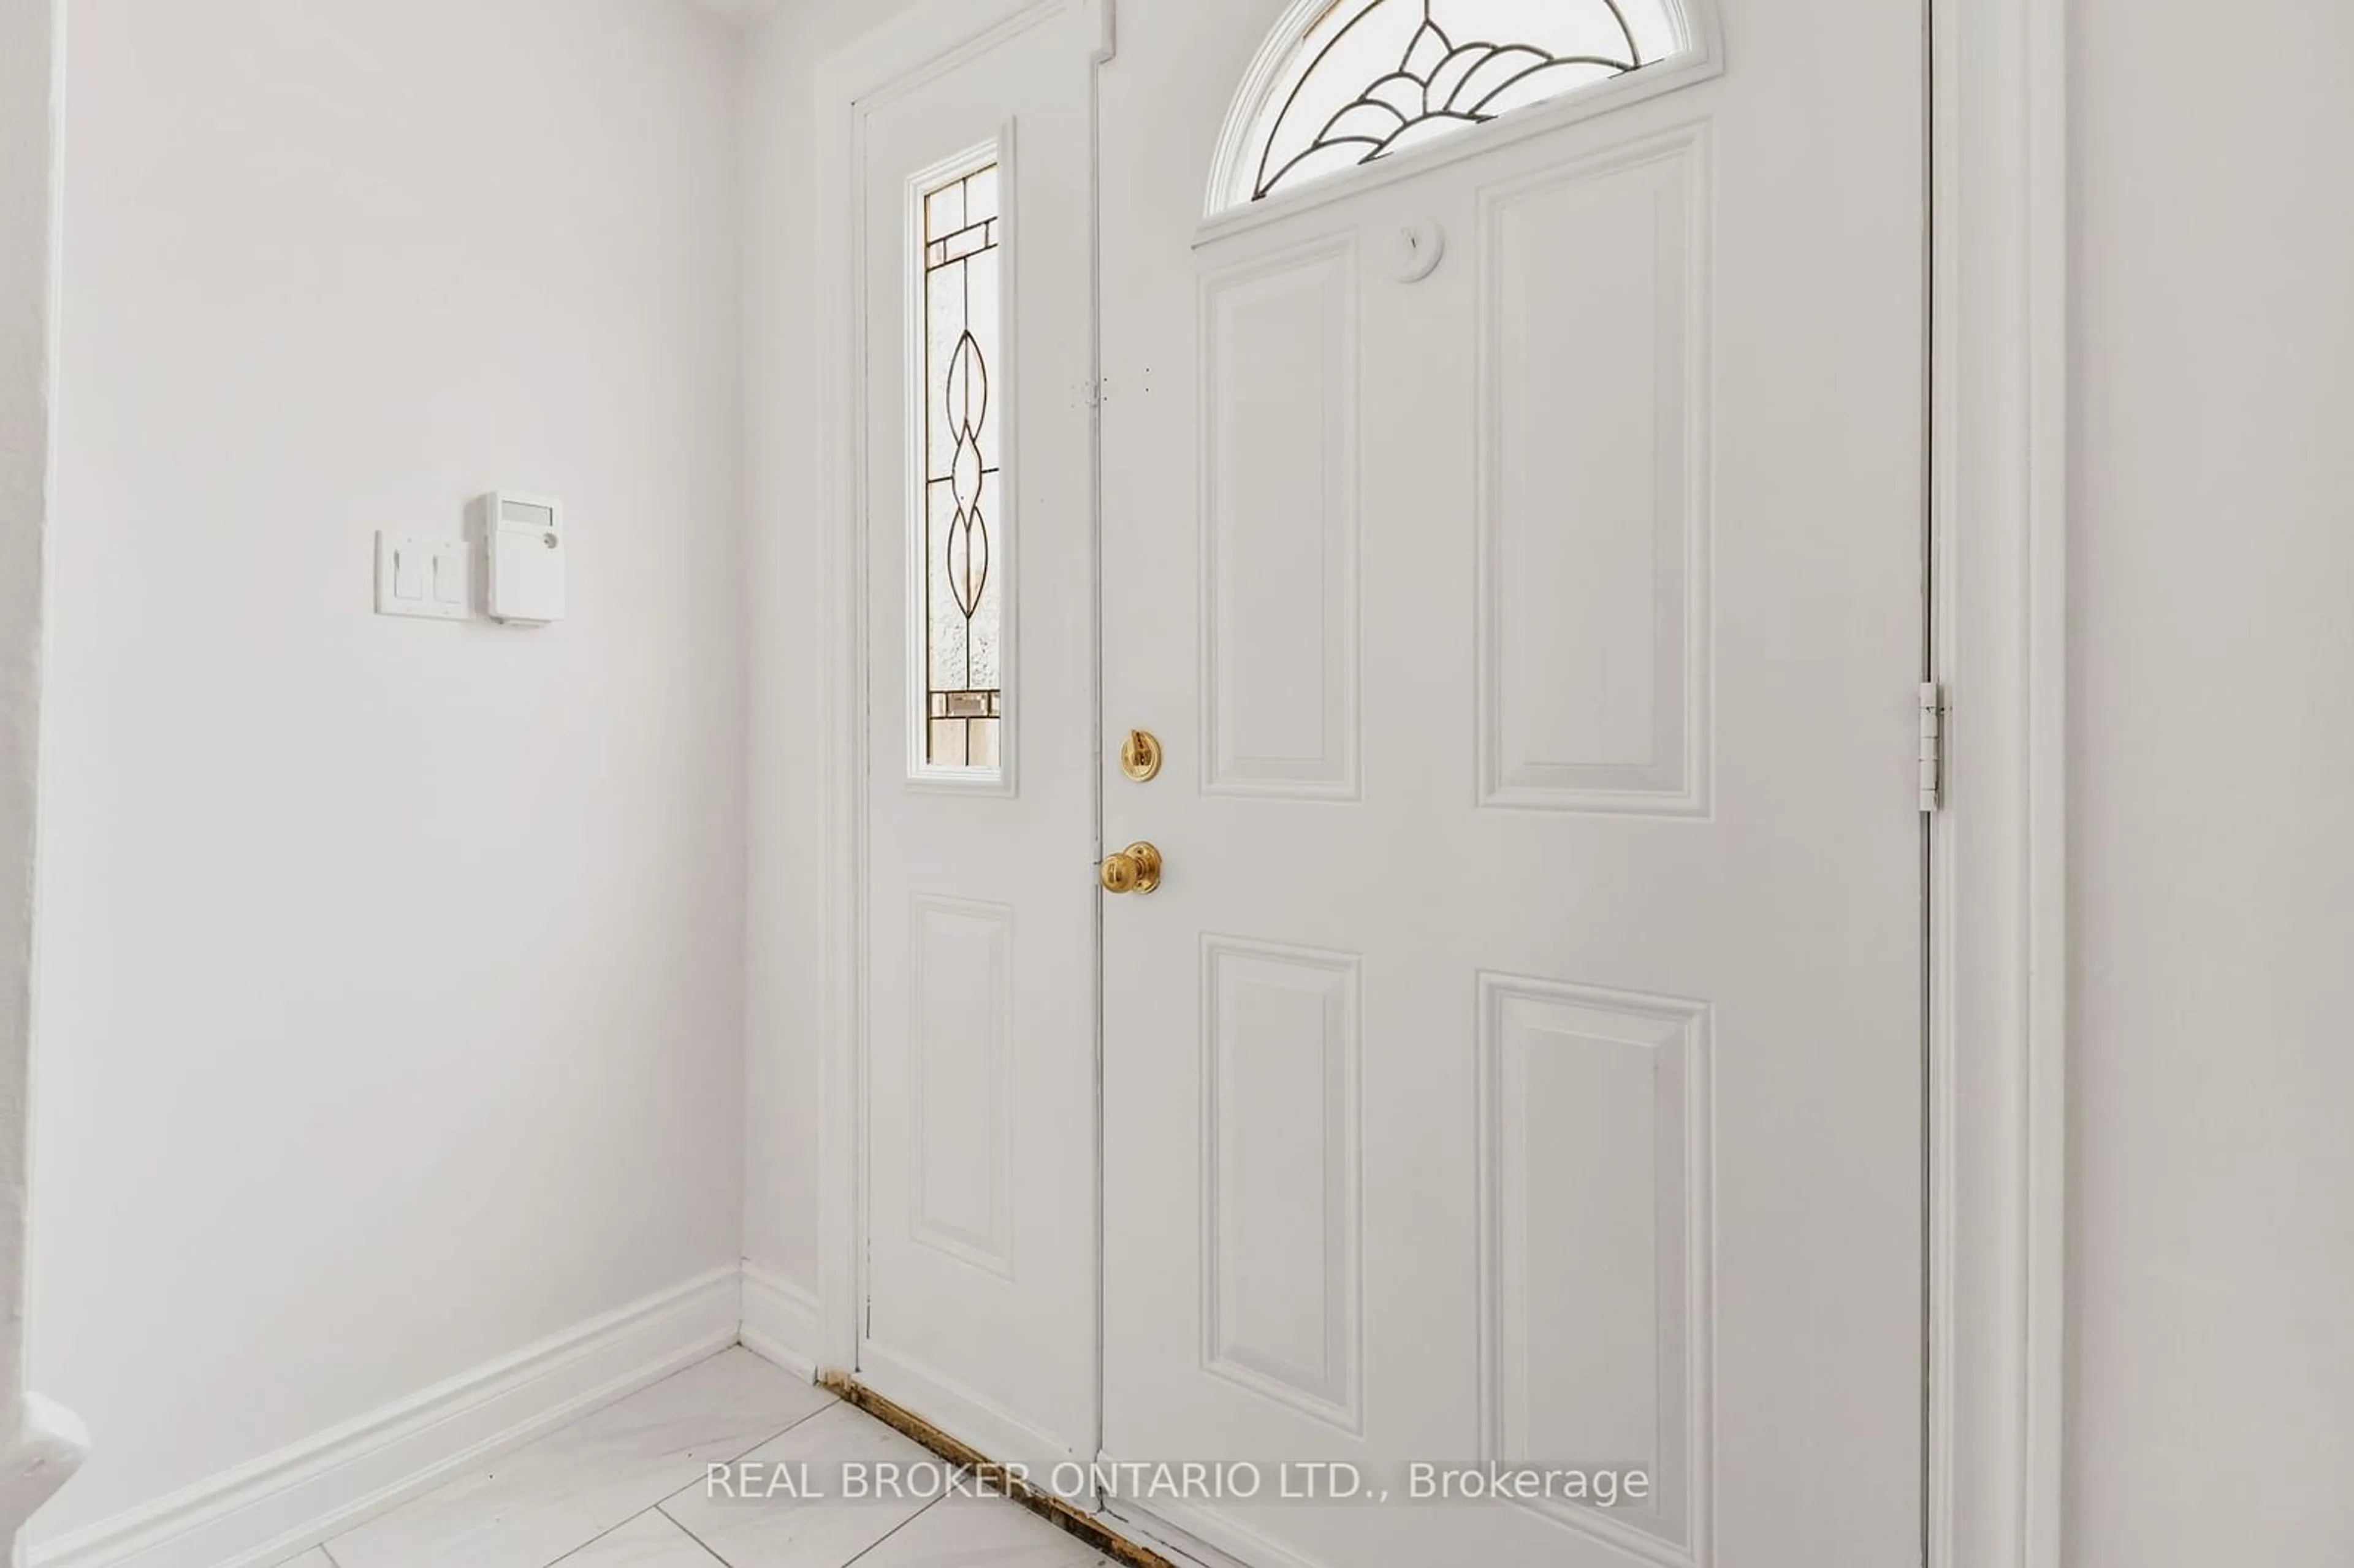 Indoor entryway for 7475 Goreway Dr #58, Mississauga Ontario L4T 3T3